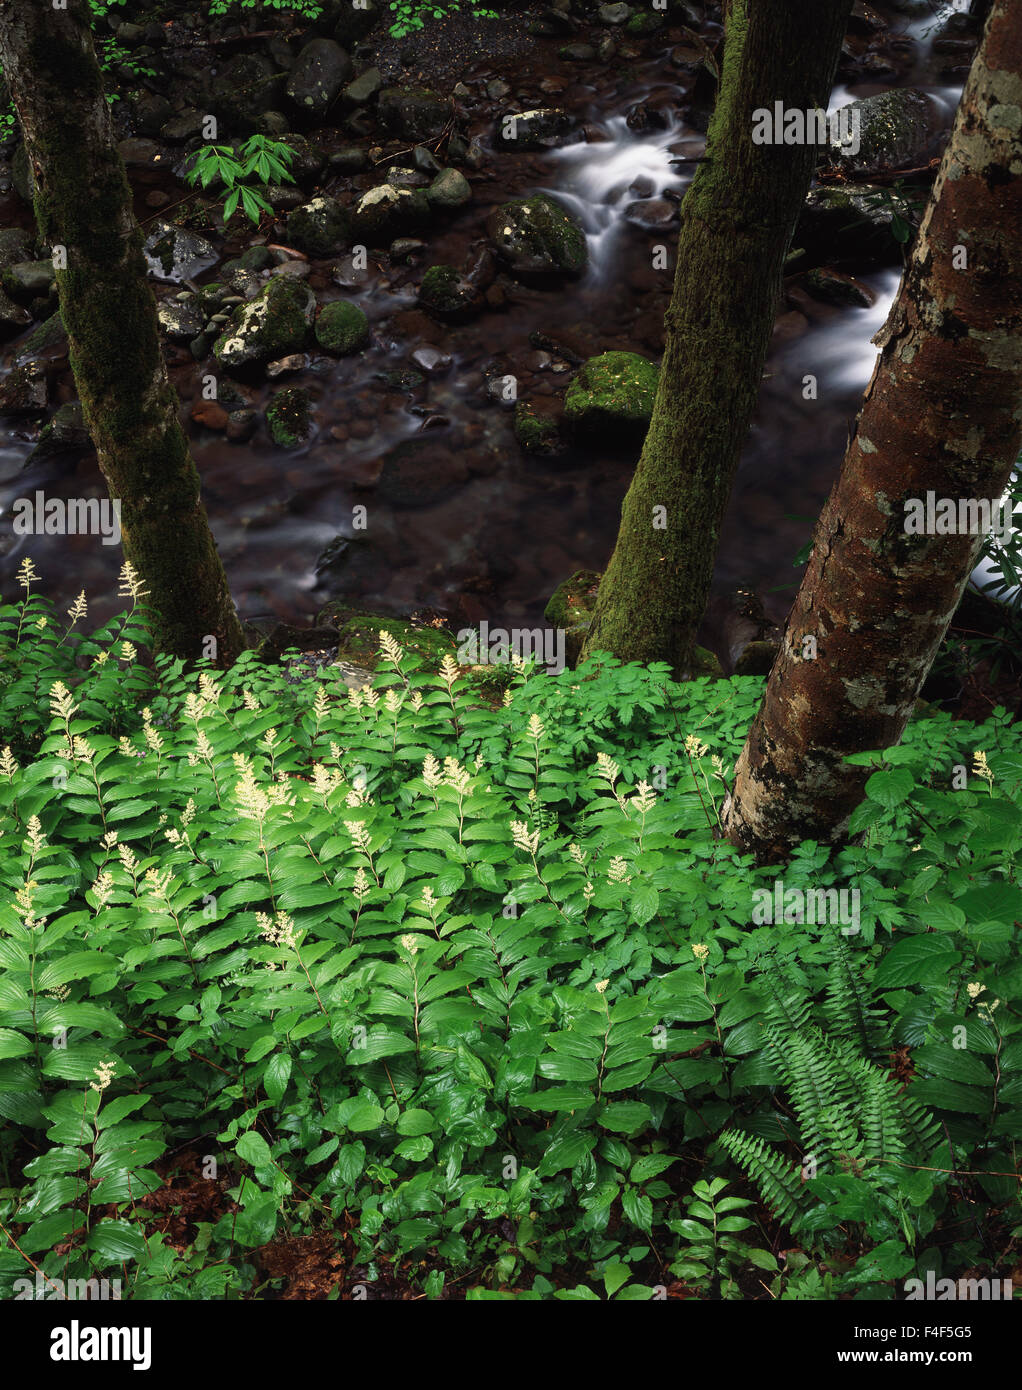 Tennessee, Great Smoky Mountains National Park, False Solomon's Seal (Maianthemum racemosum) wildflowers along a stream. (Large format sizes available) Stock Photo